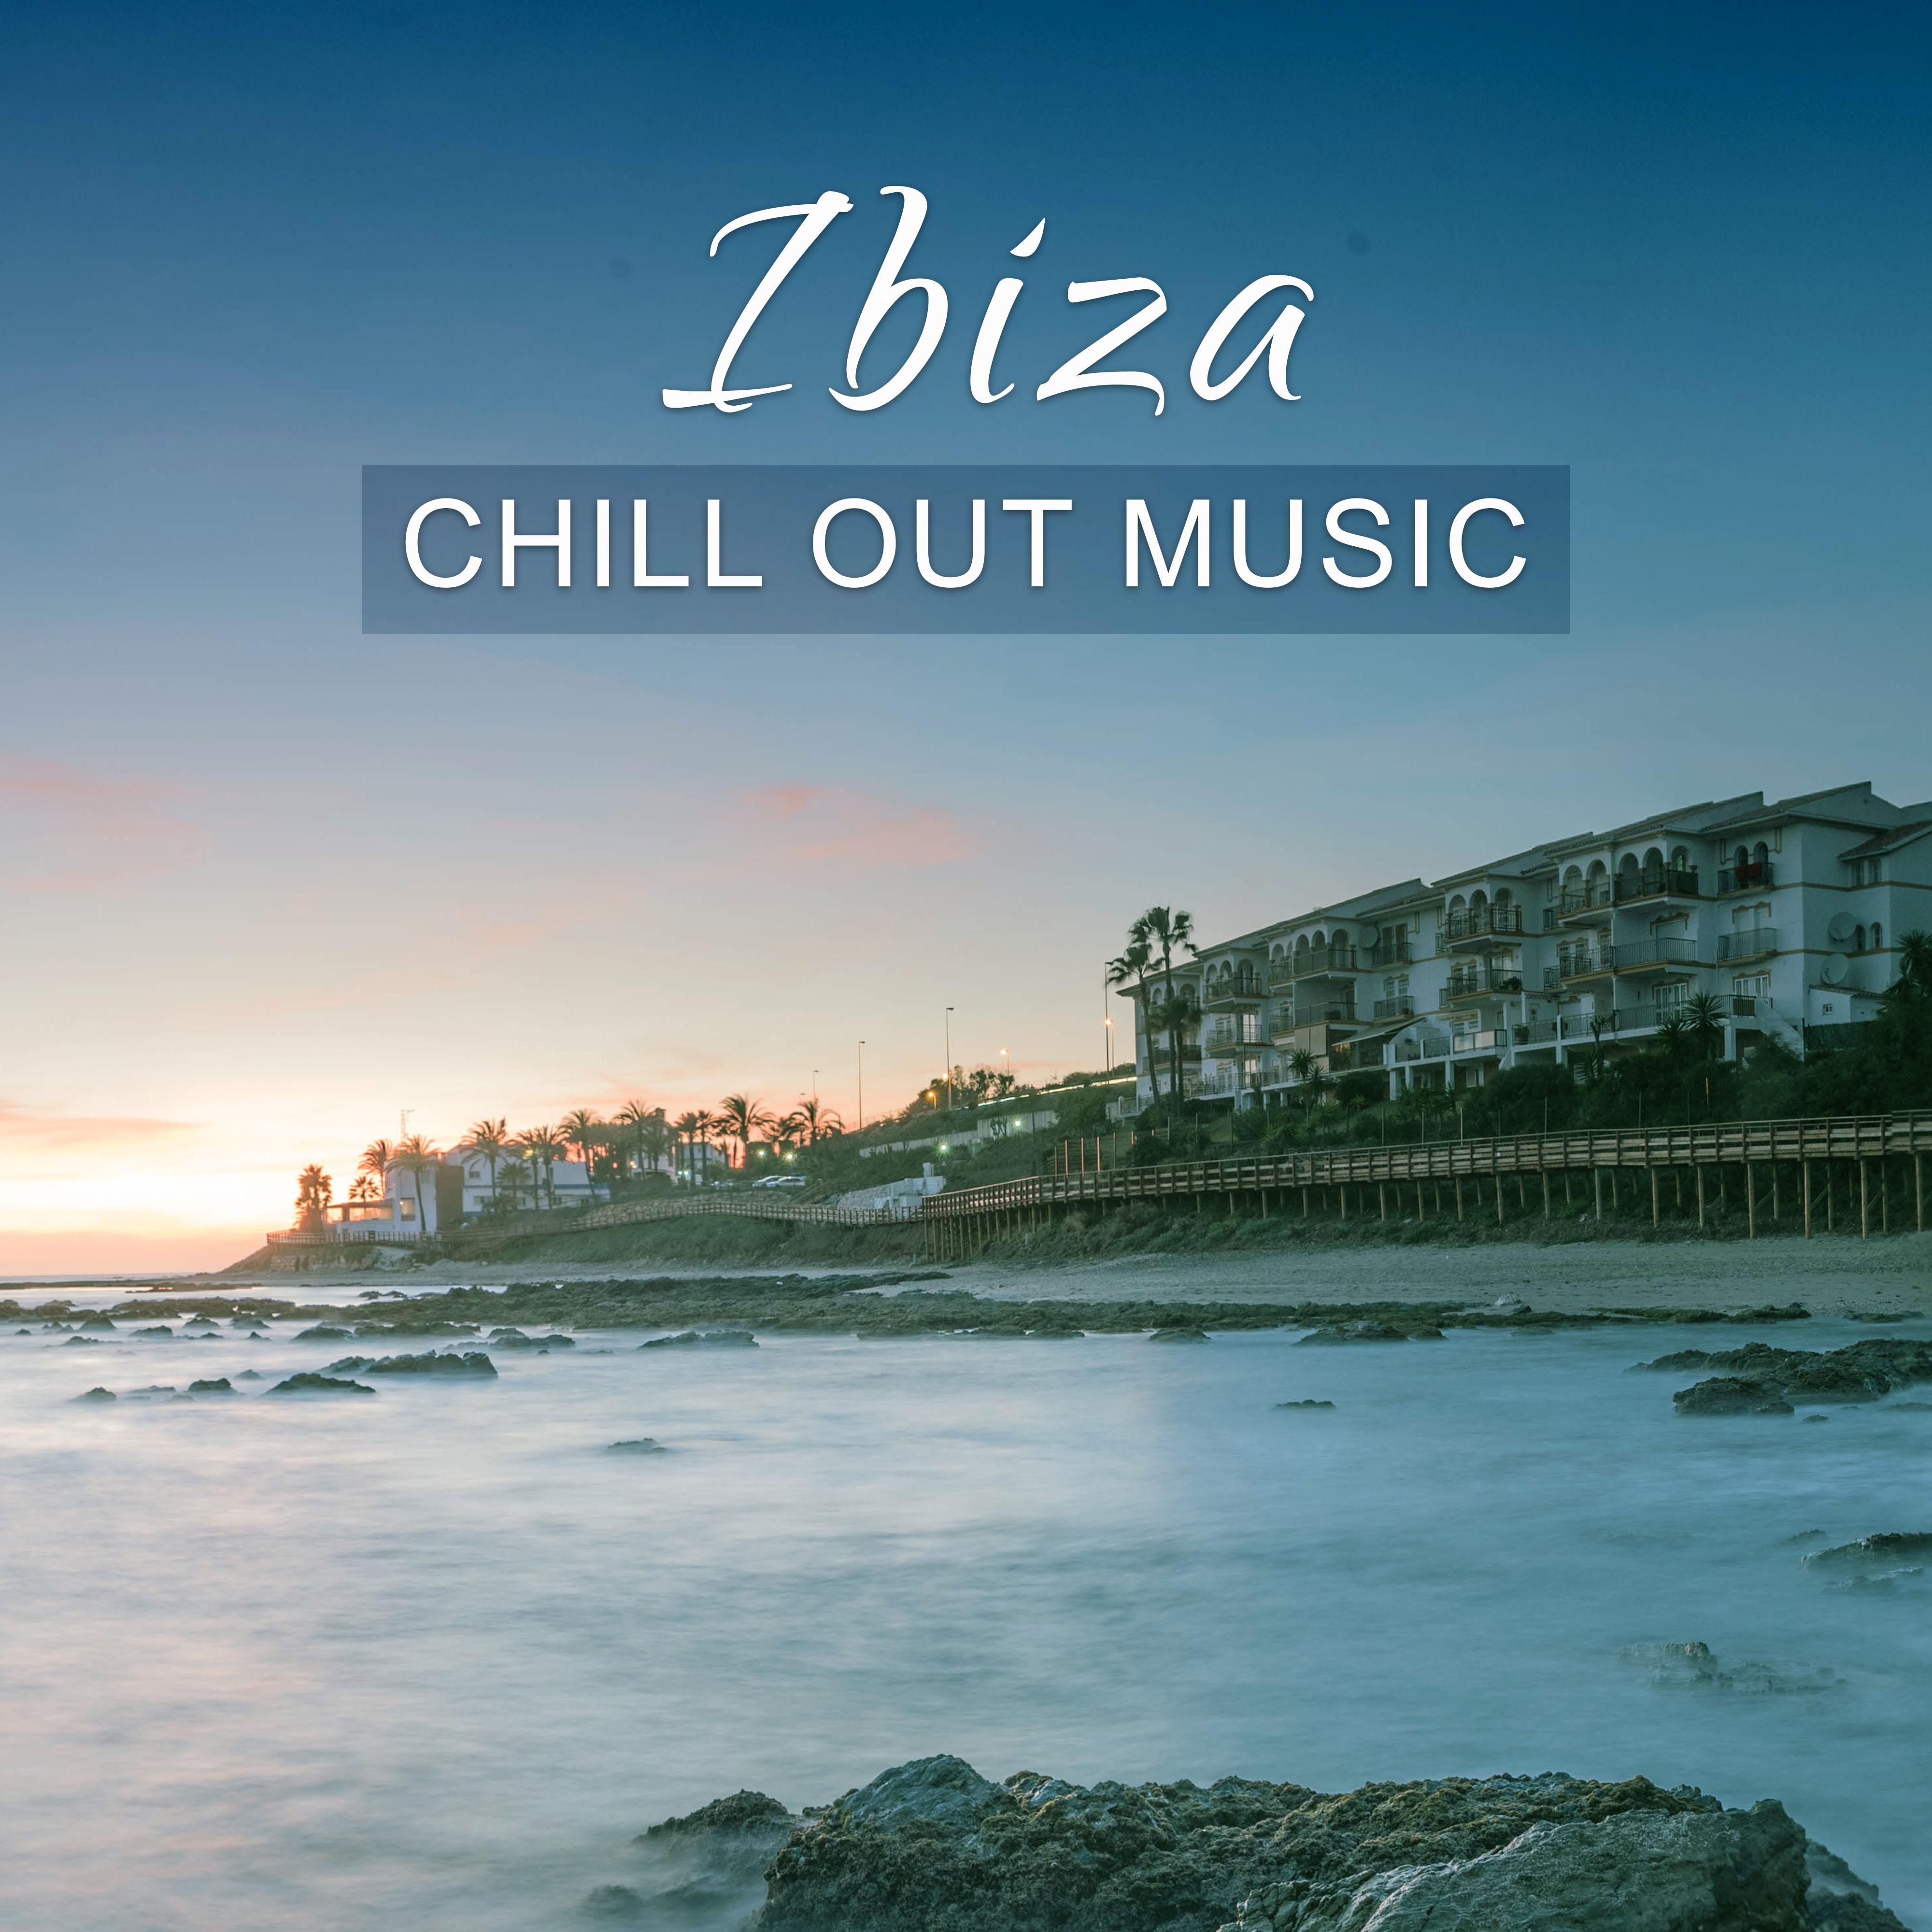 Ibiza Chill Out Music – Chill on Ibiza, Relaxation Music, Sweet Sounds to Relax, Peaceful Music